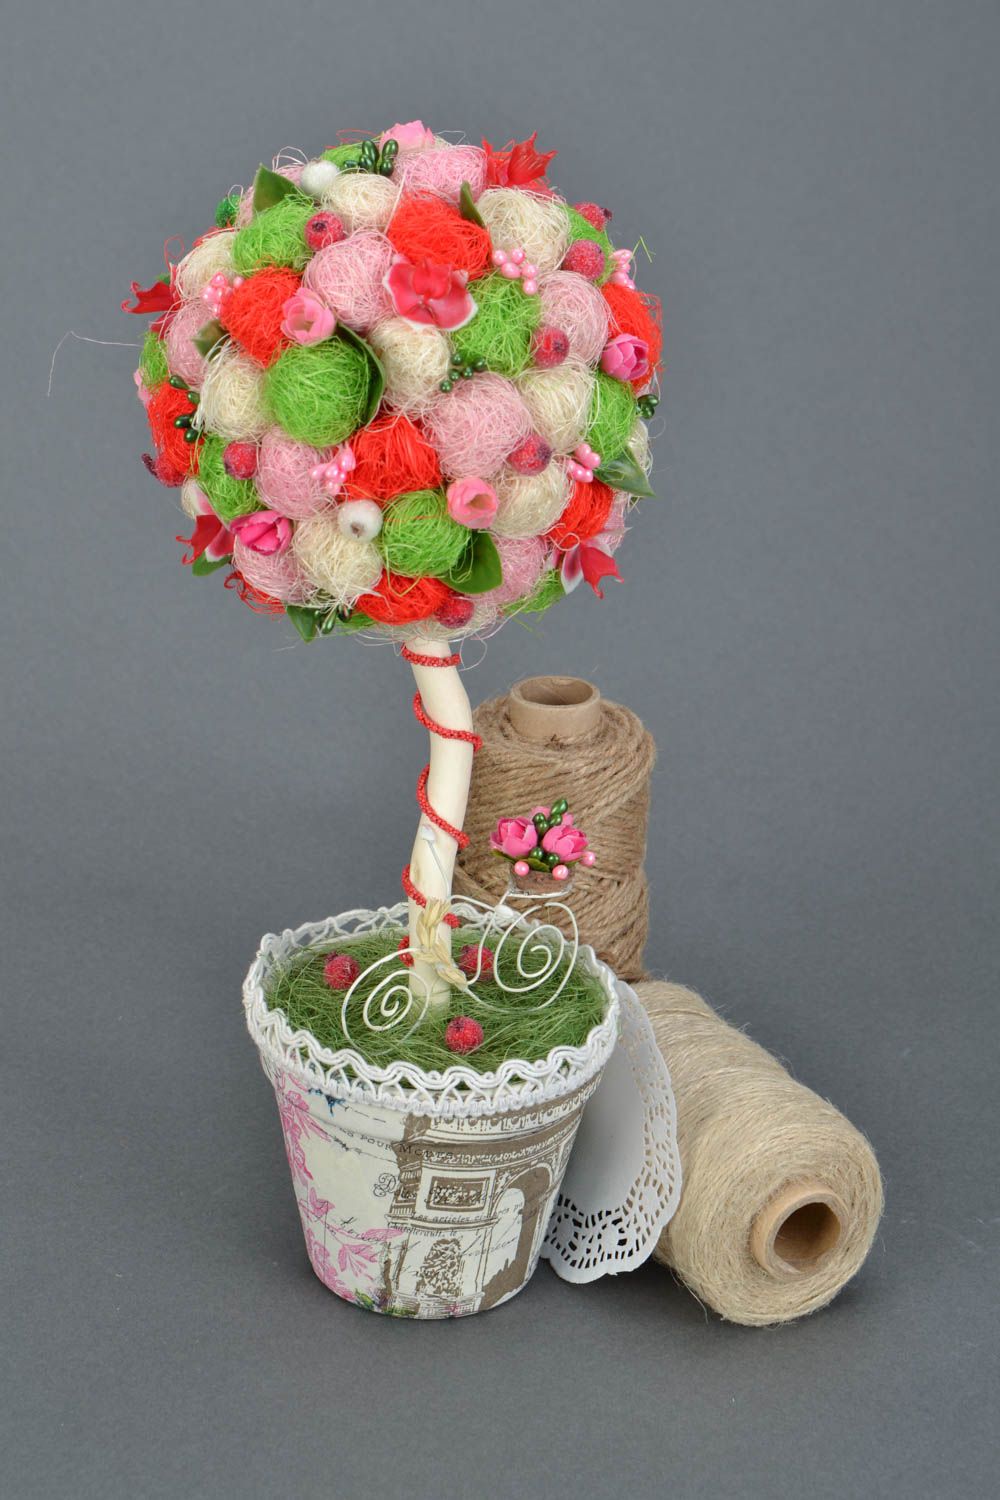 Handmade bright colorful round decorative tree topiary with flowers and berries photo 1